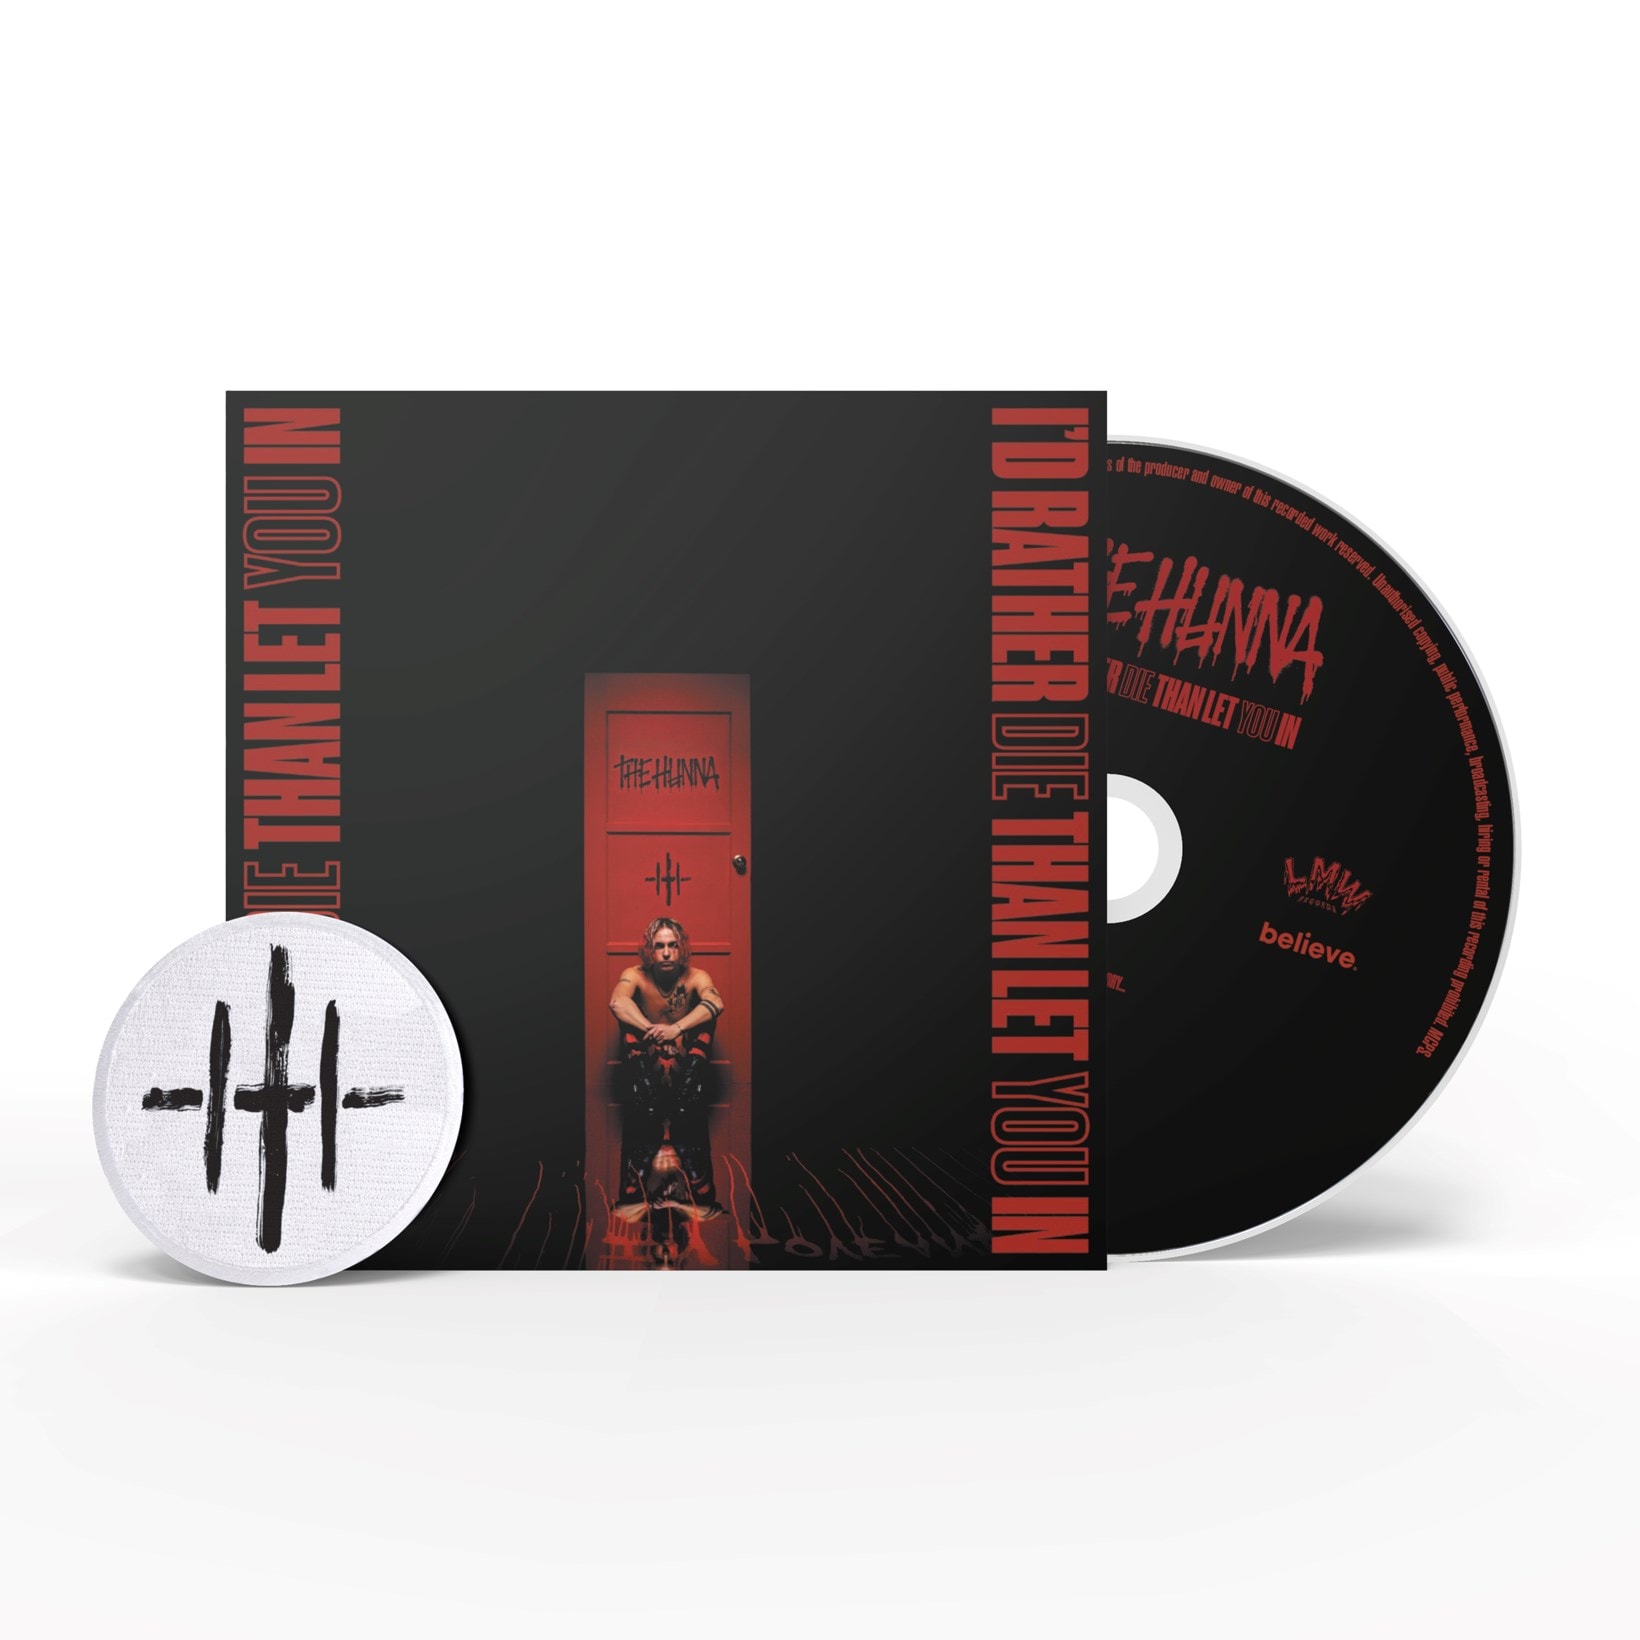 I'd Rather Die Than Let You In (hmv Exclusive)